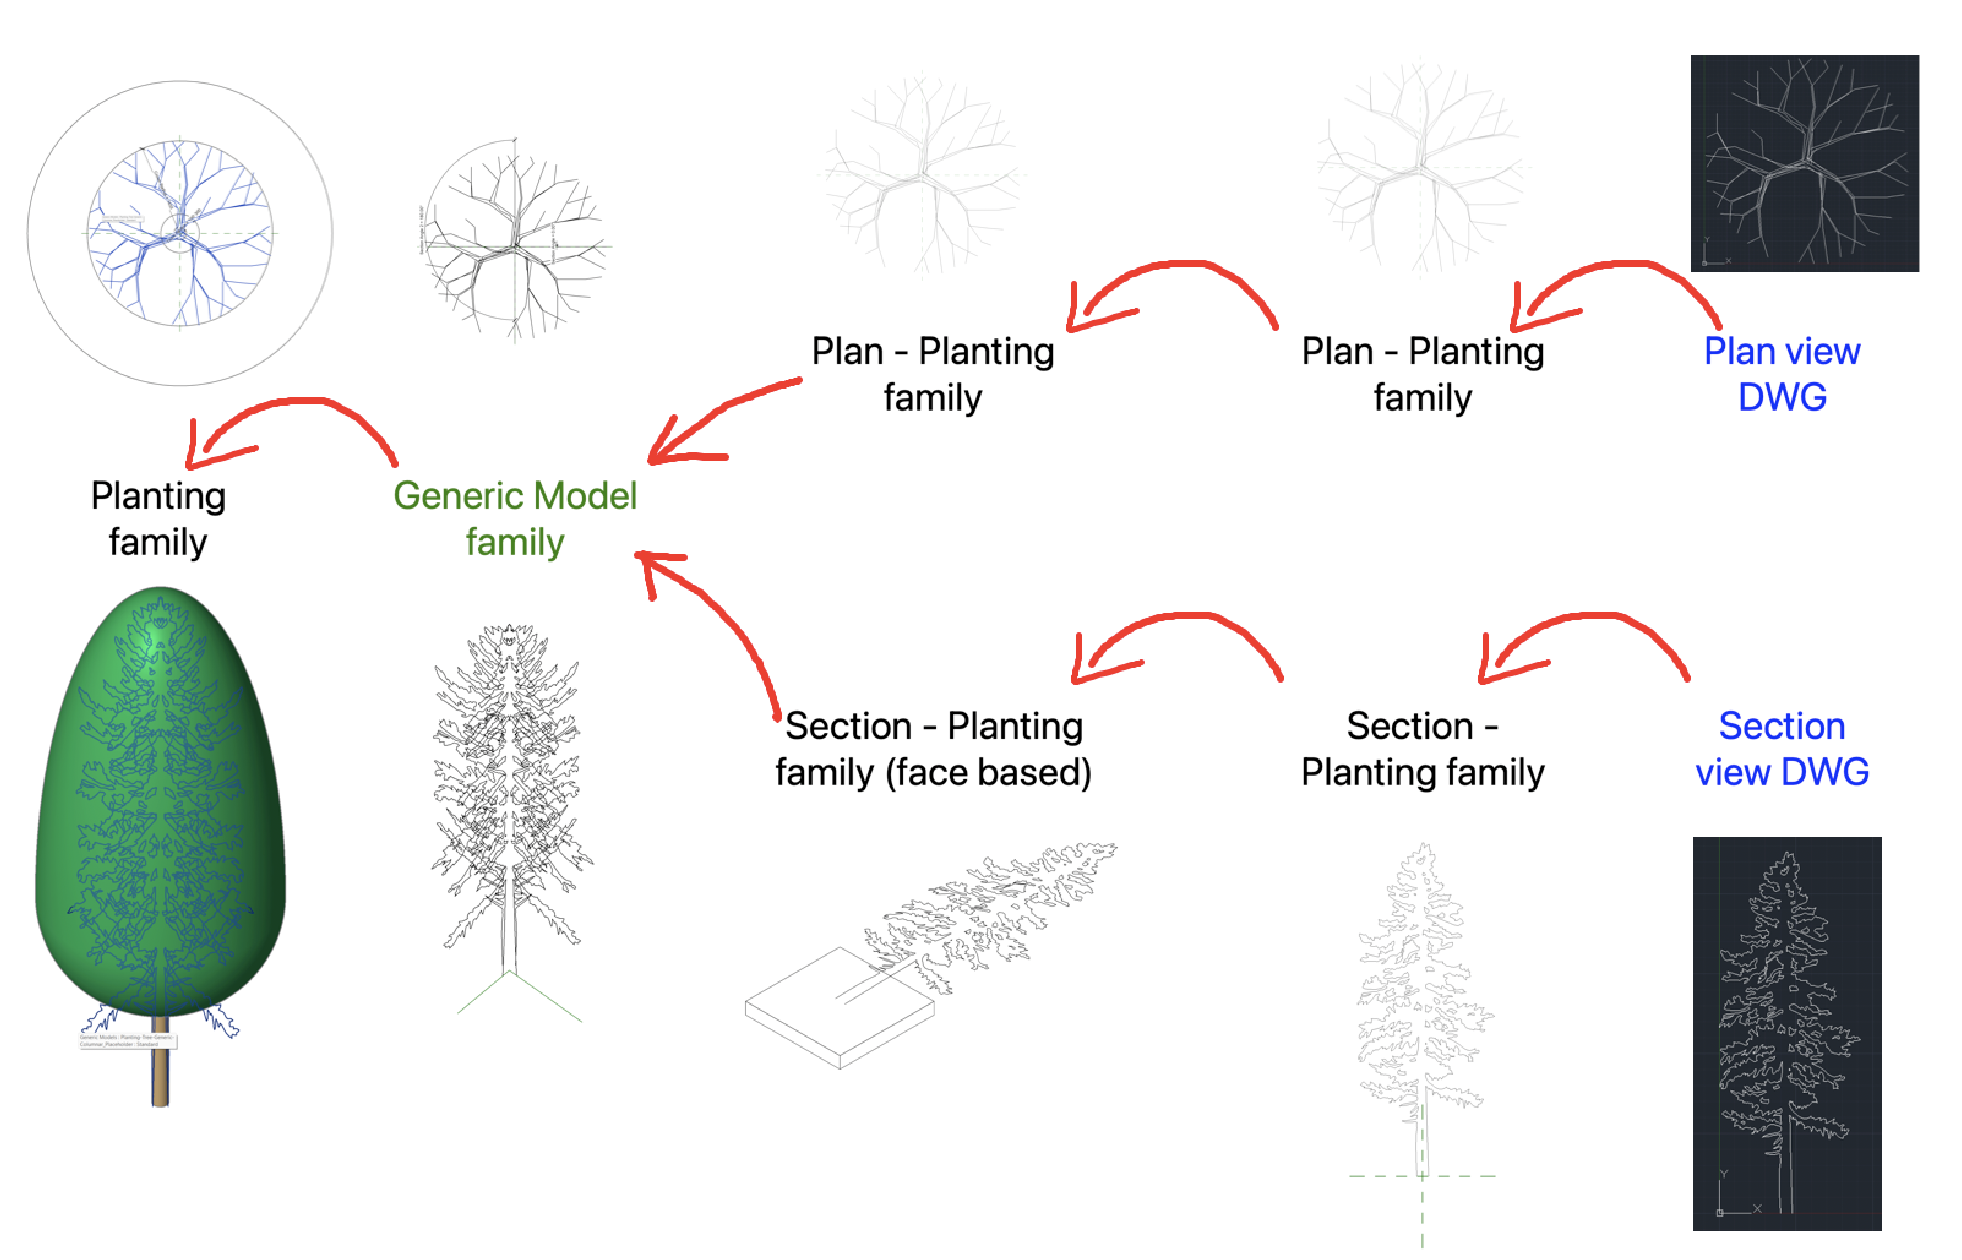 Diagram showing the relationship between an image of a Plan View DWG, Plan - planting family, generic model and ending with the planting family.